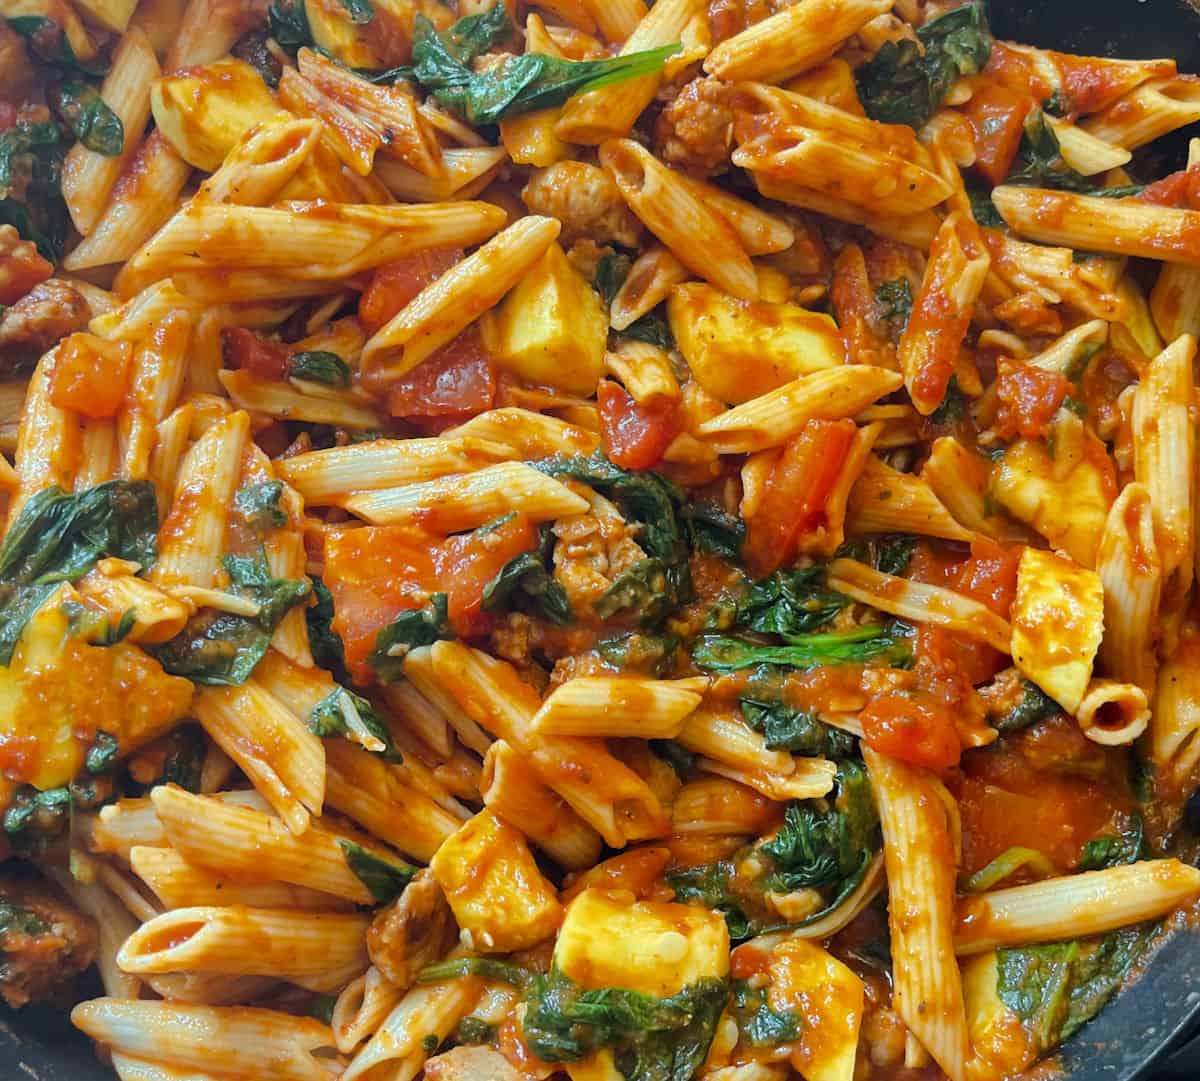 penne pasta added to sausage marinara and vegetables skillet mixed together